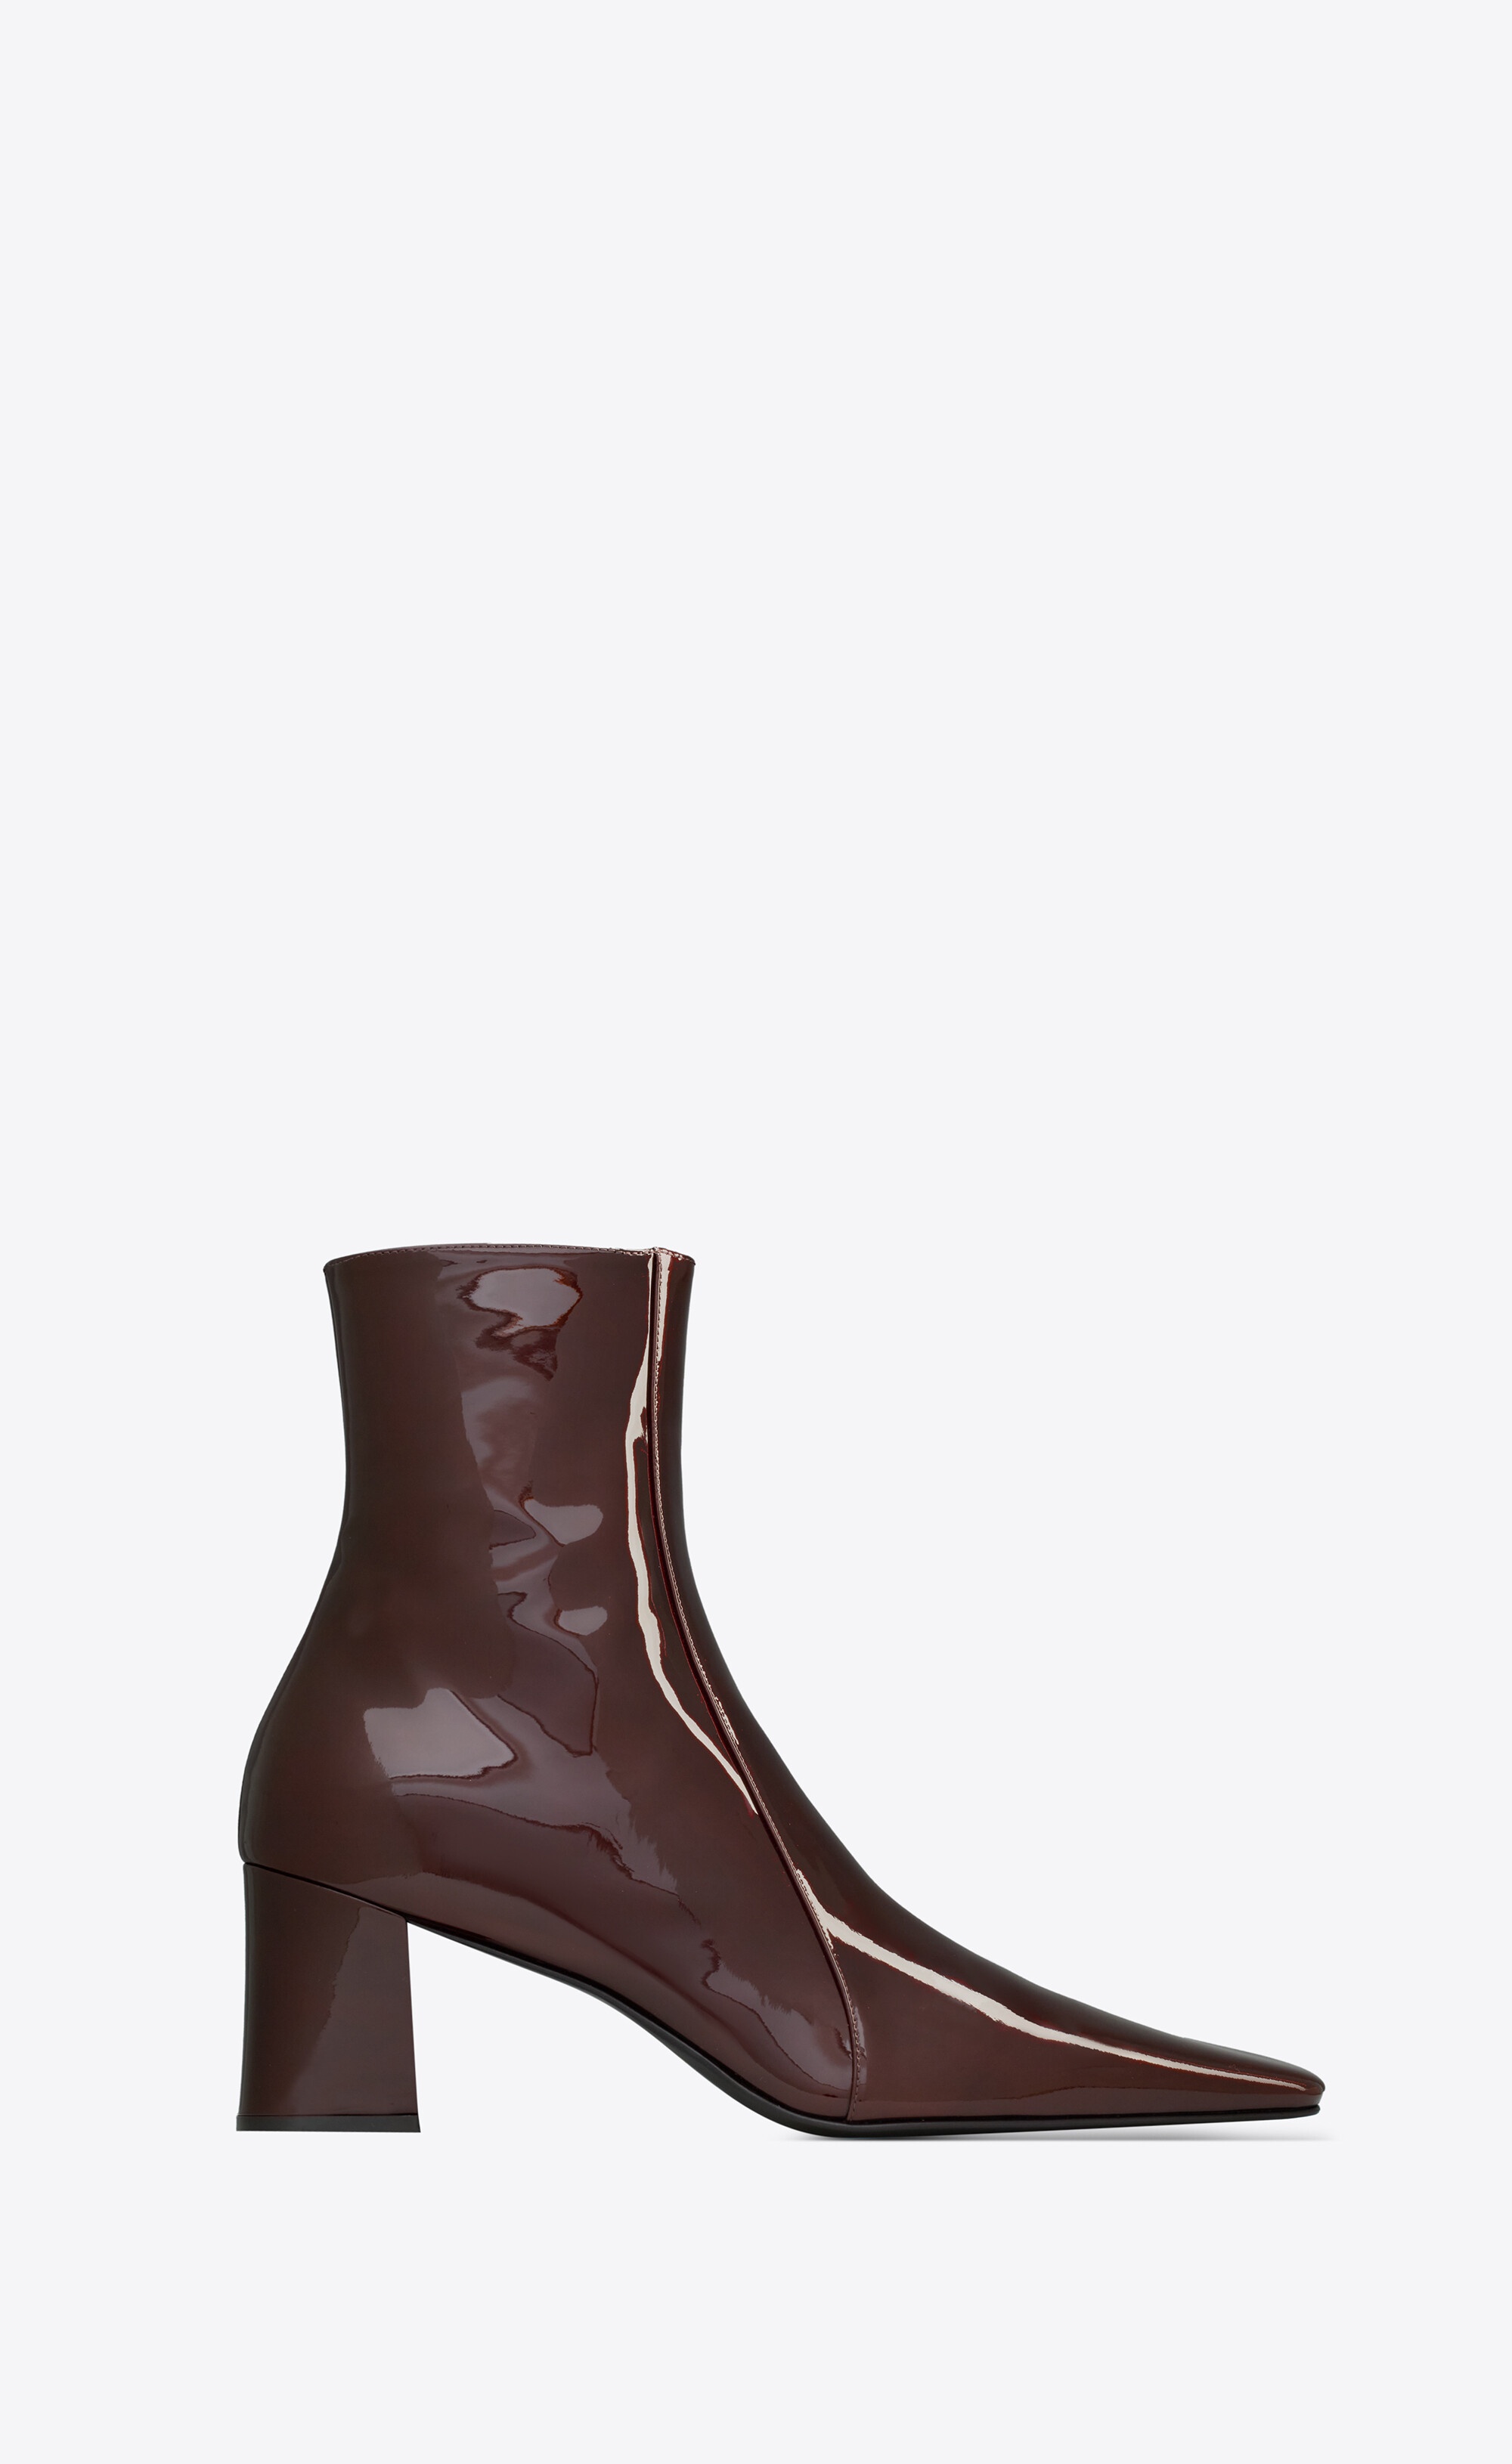 SAINT LAURENT rainer zipped boots in patent leather | REVERSIBLE